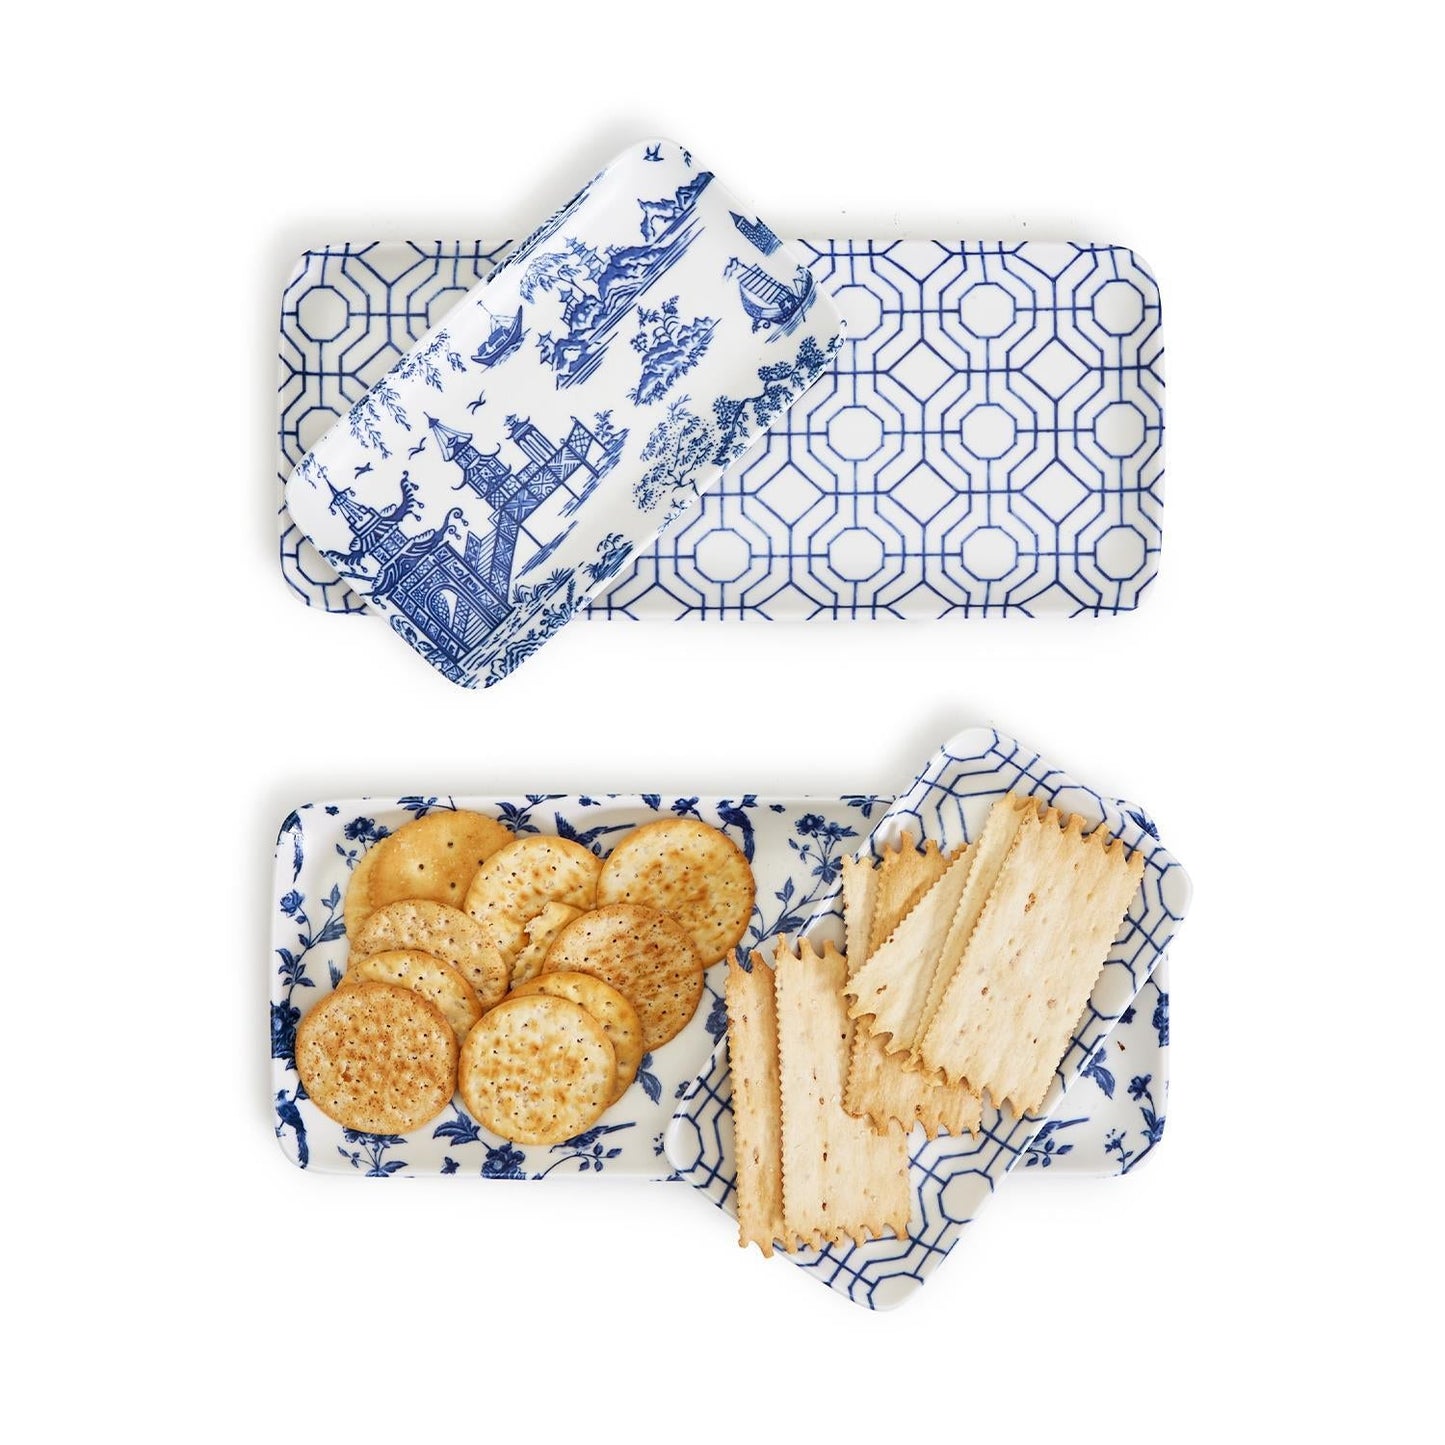 Blue Appetizer Platters, Blue and White Porcelain Dishes